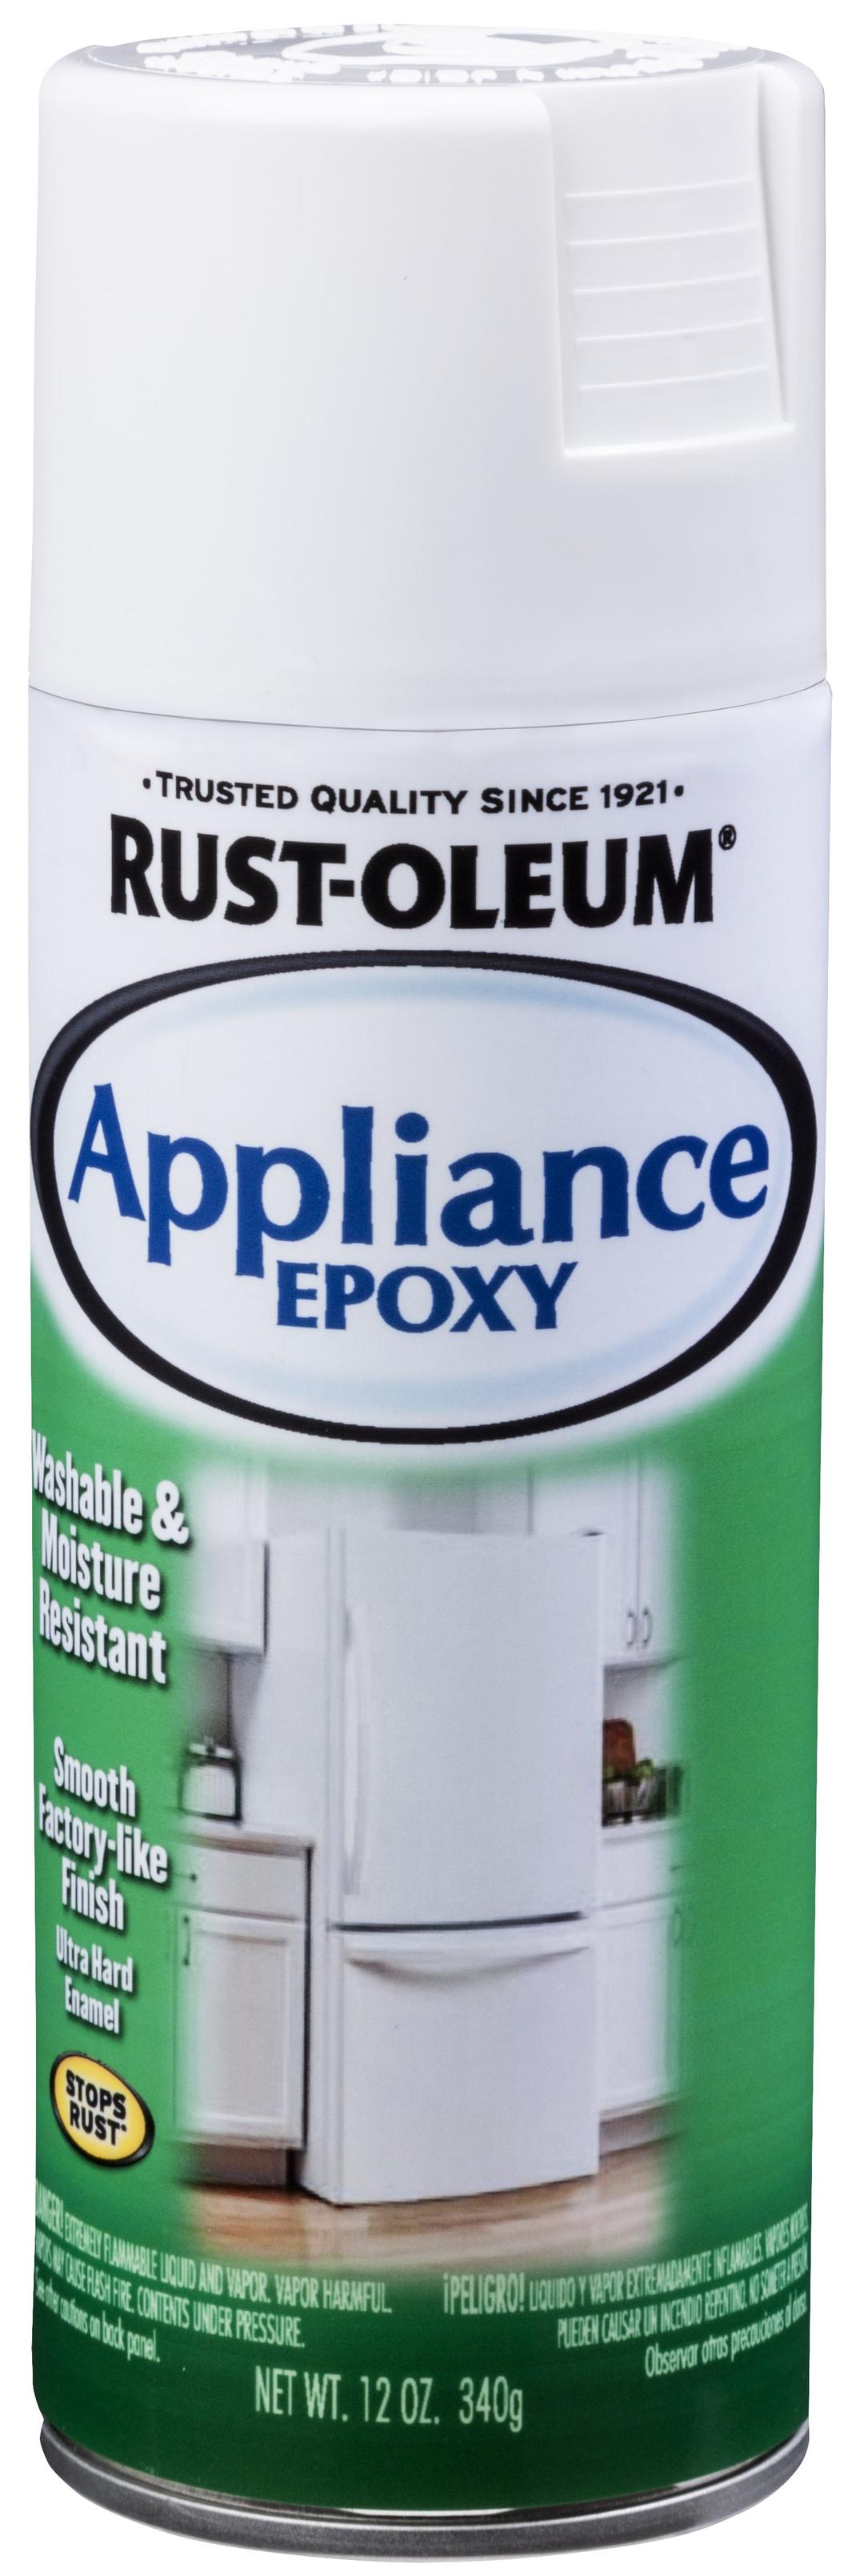 Rust-Oleum Specialty 0.6 oz. Gloss White Appliance Epoxy Touch-Up Paint  237705 - The Home Depot